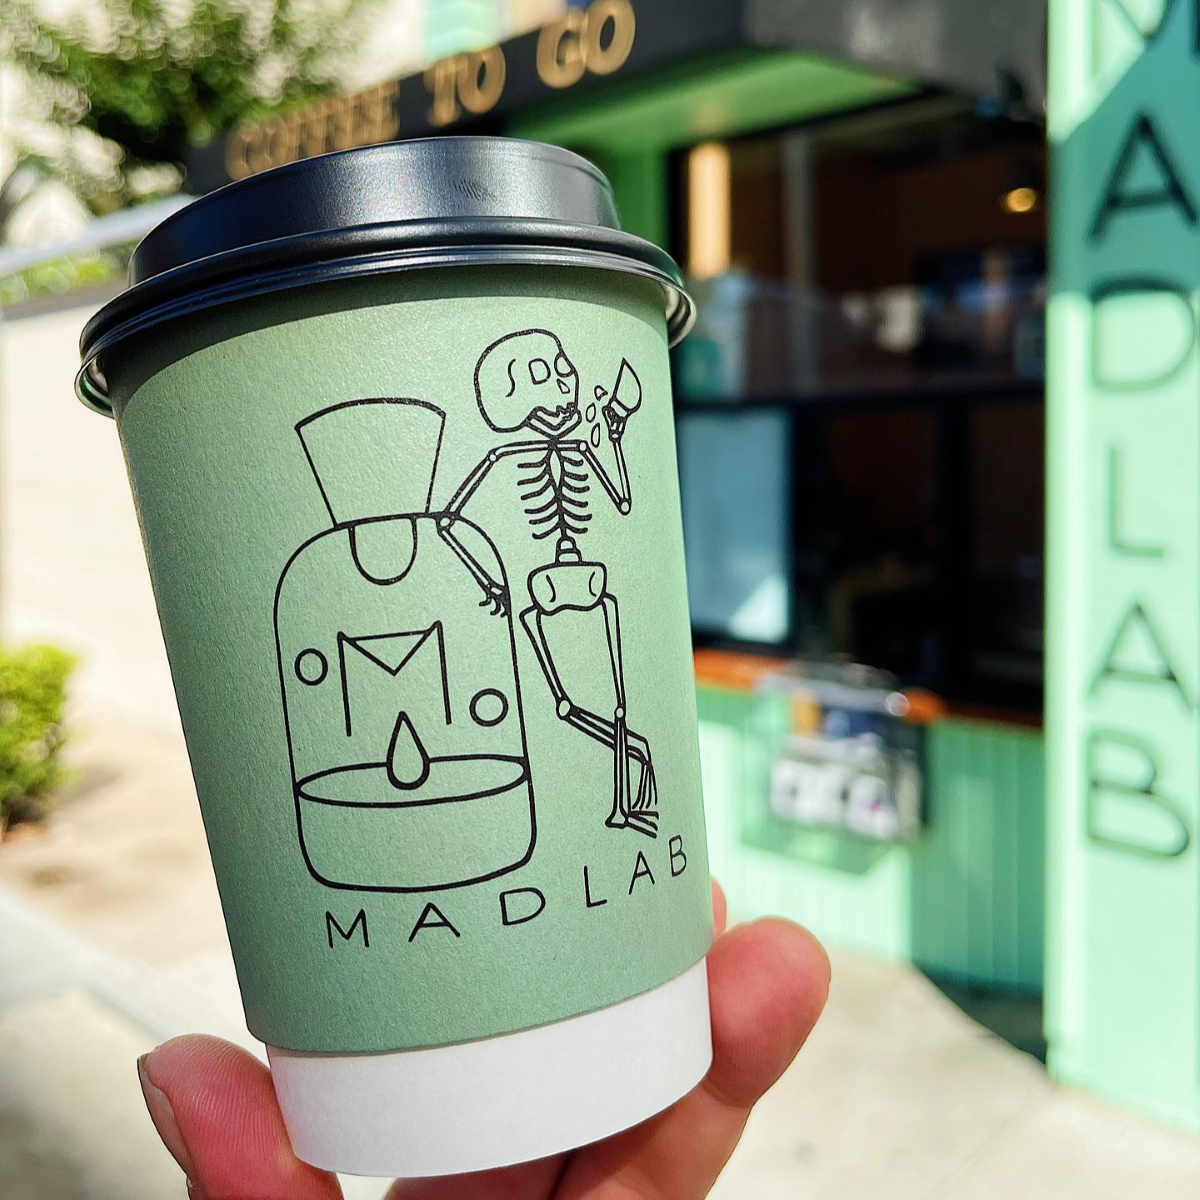 MadLab Coffee is Opening Three New Locations 